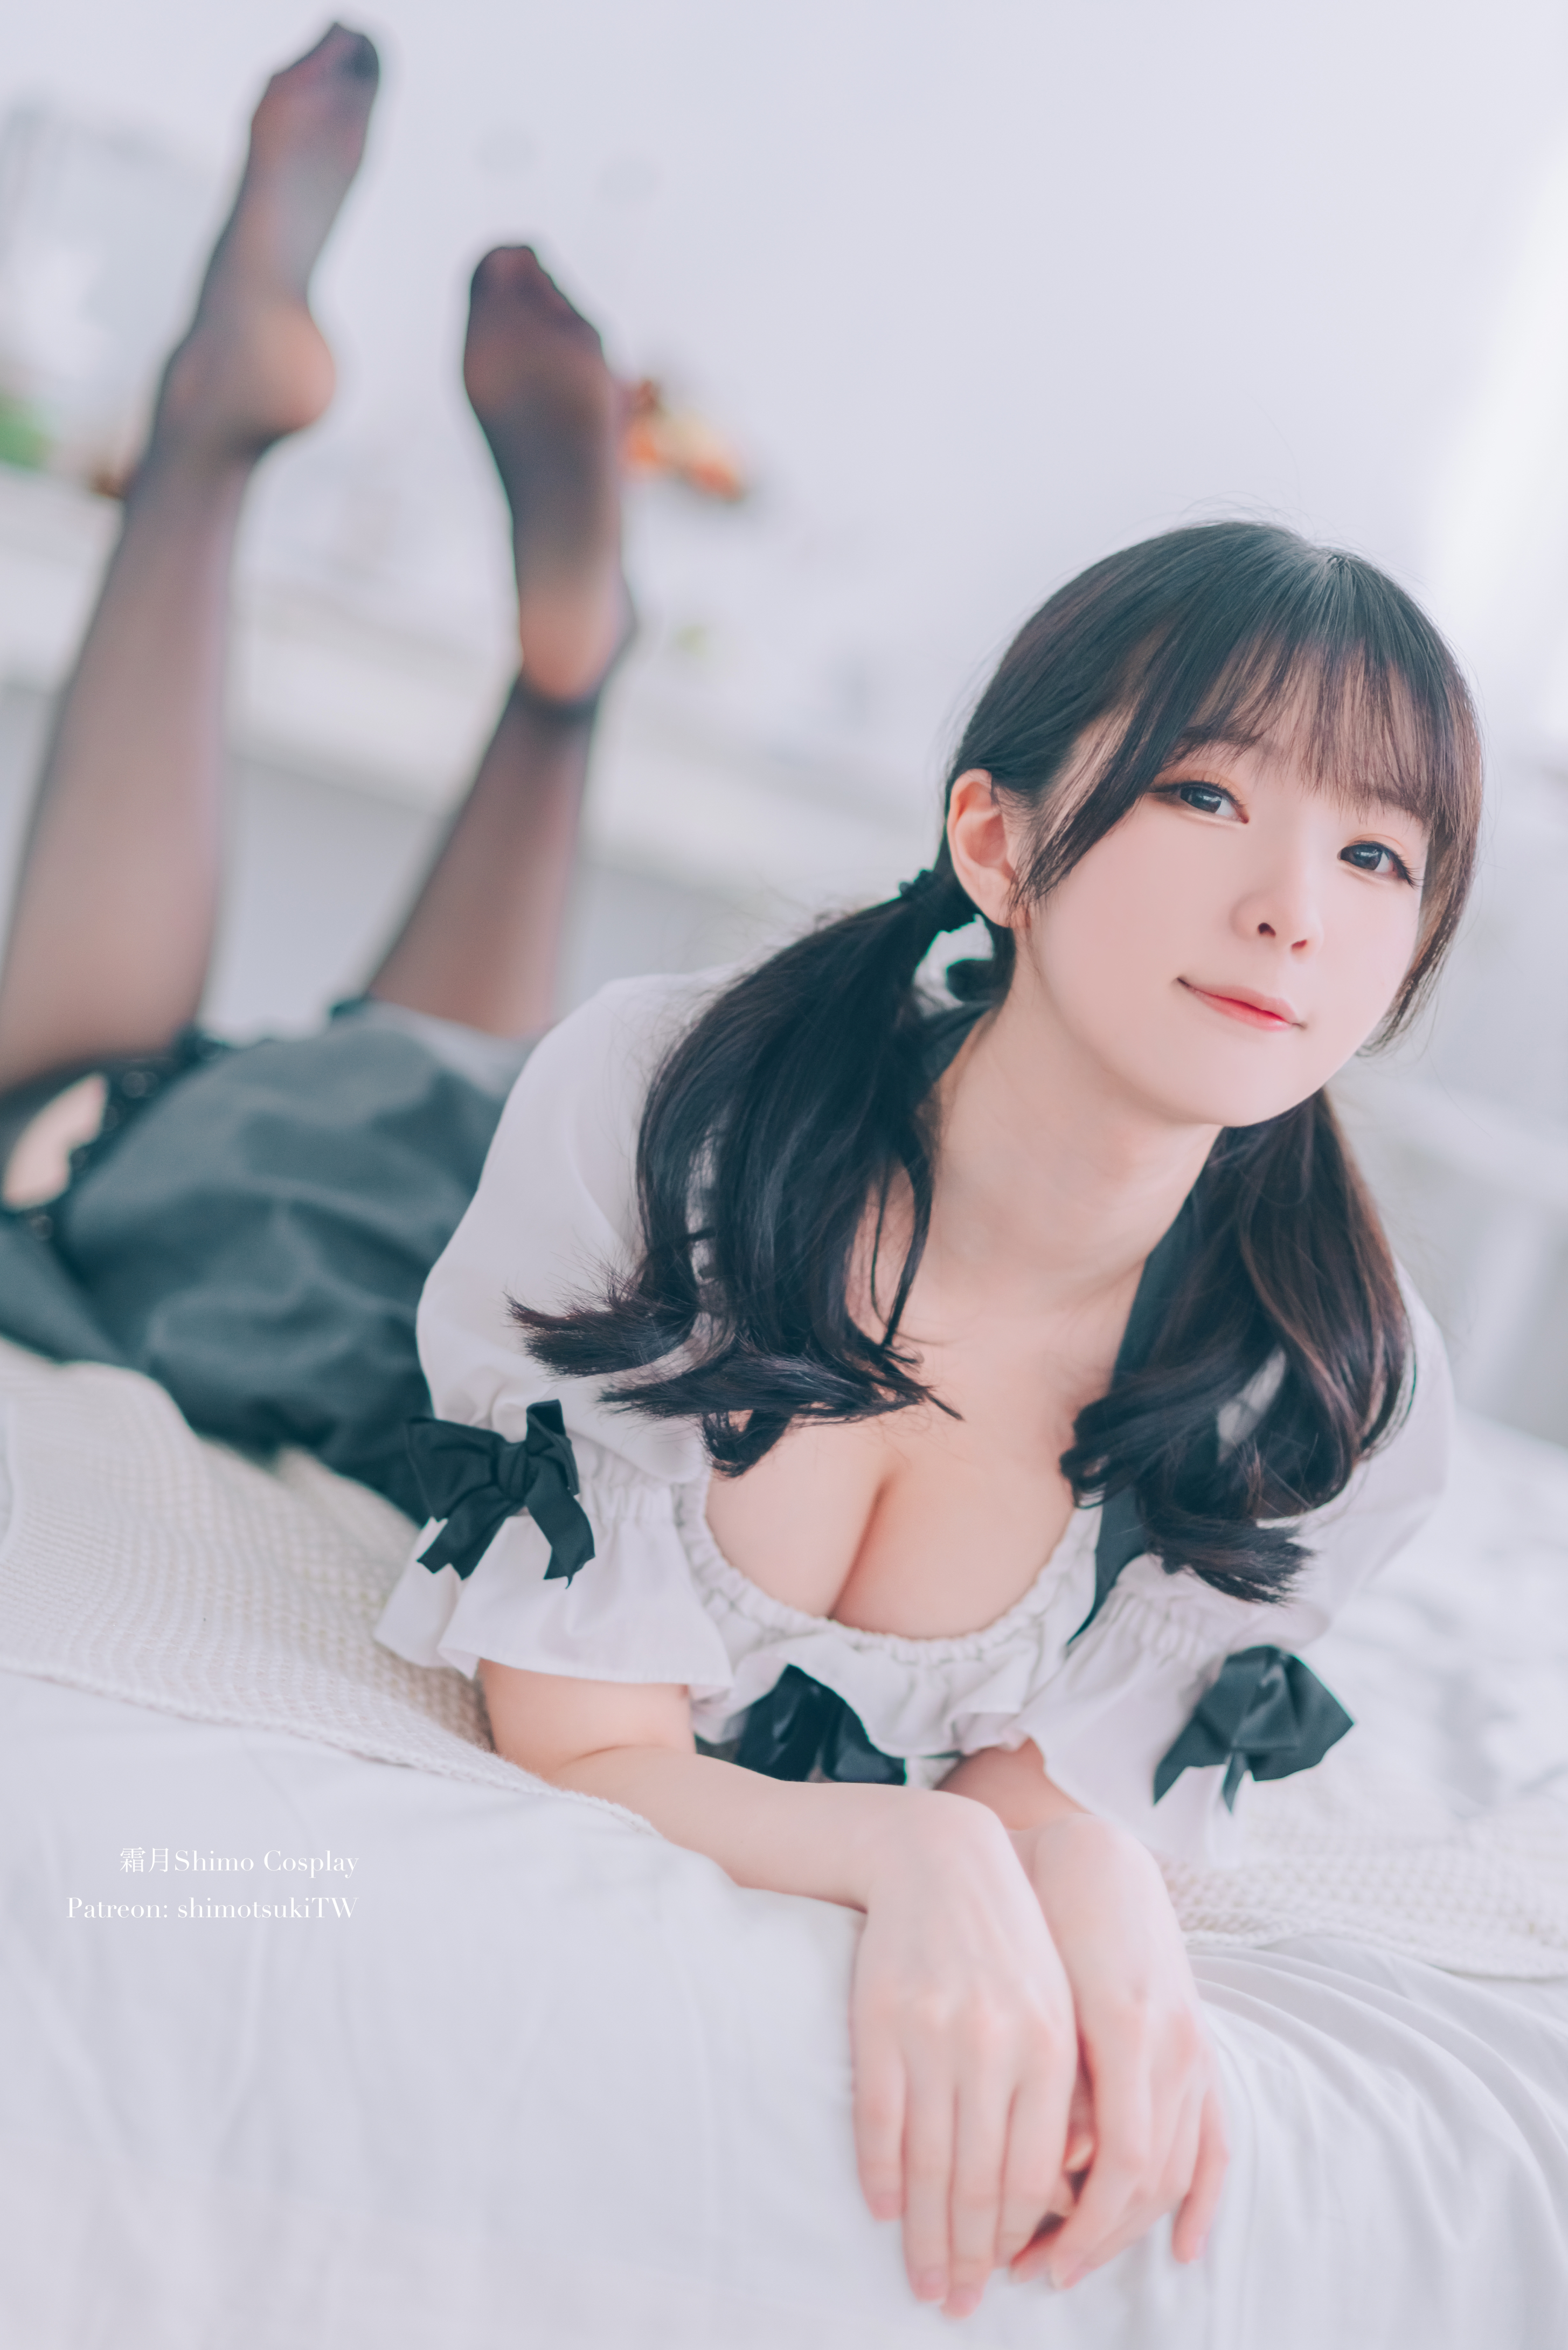 People 2910x4360 Shimo Cosplay women model Asian twintails dress stockings black stockings indoors women indoors brunette cleavage feet in the air pointed toes